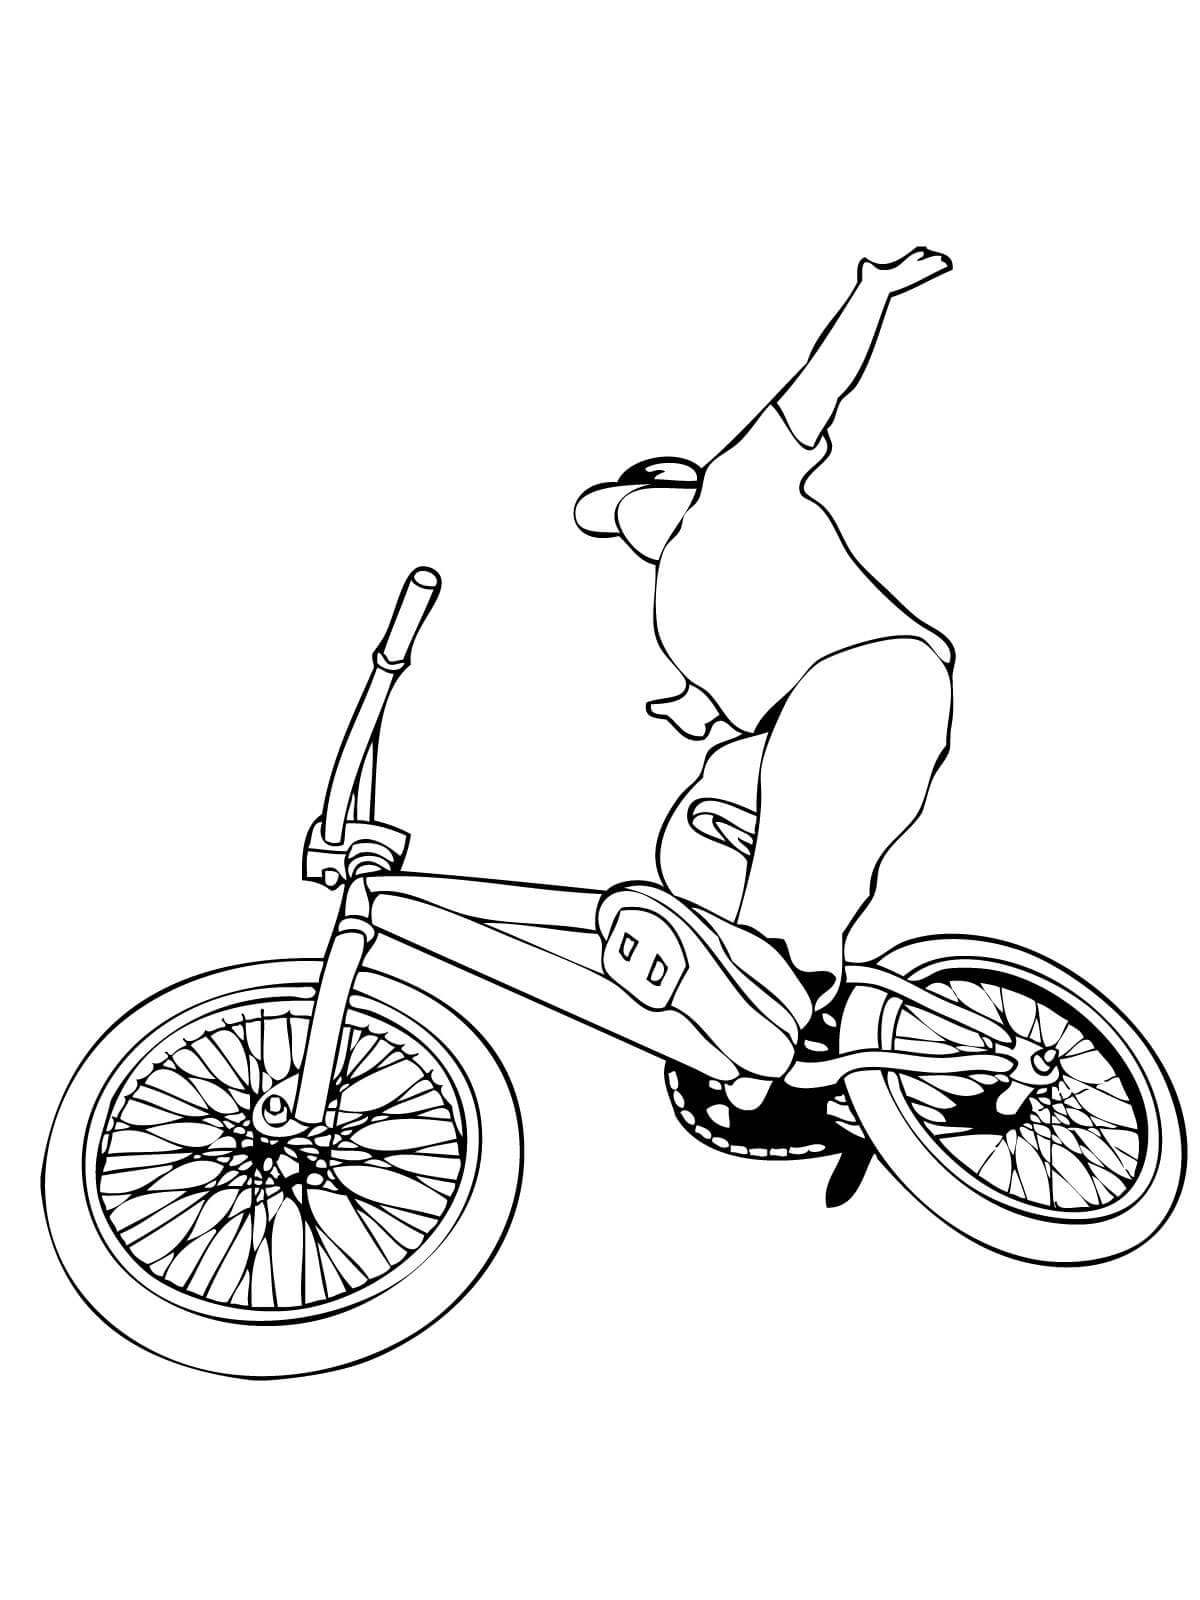 Riding Bmx Bicycle Coloring Page